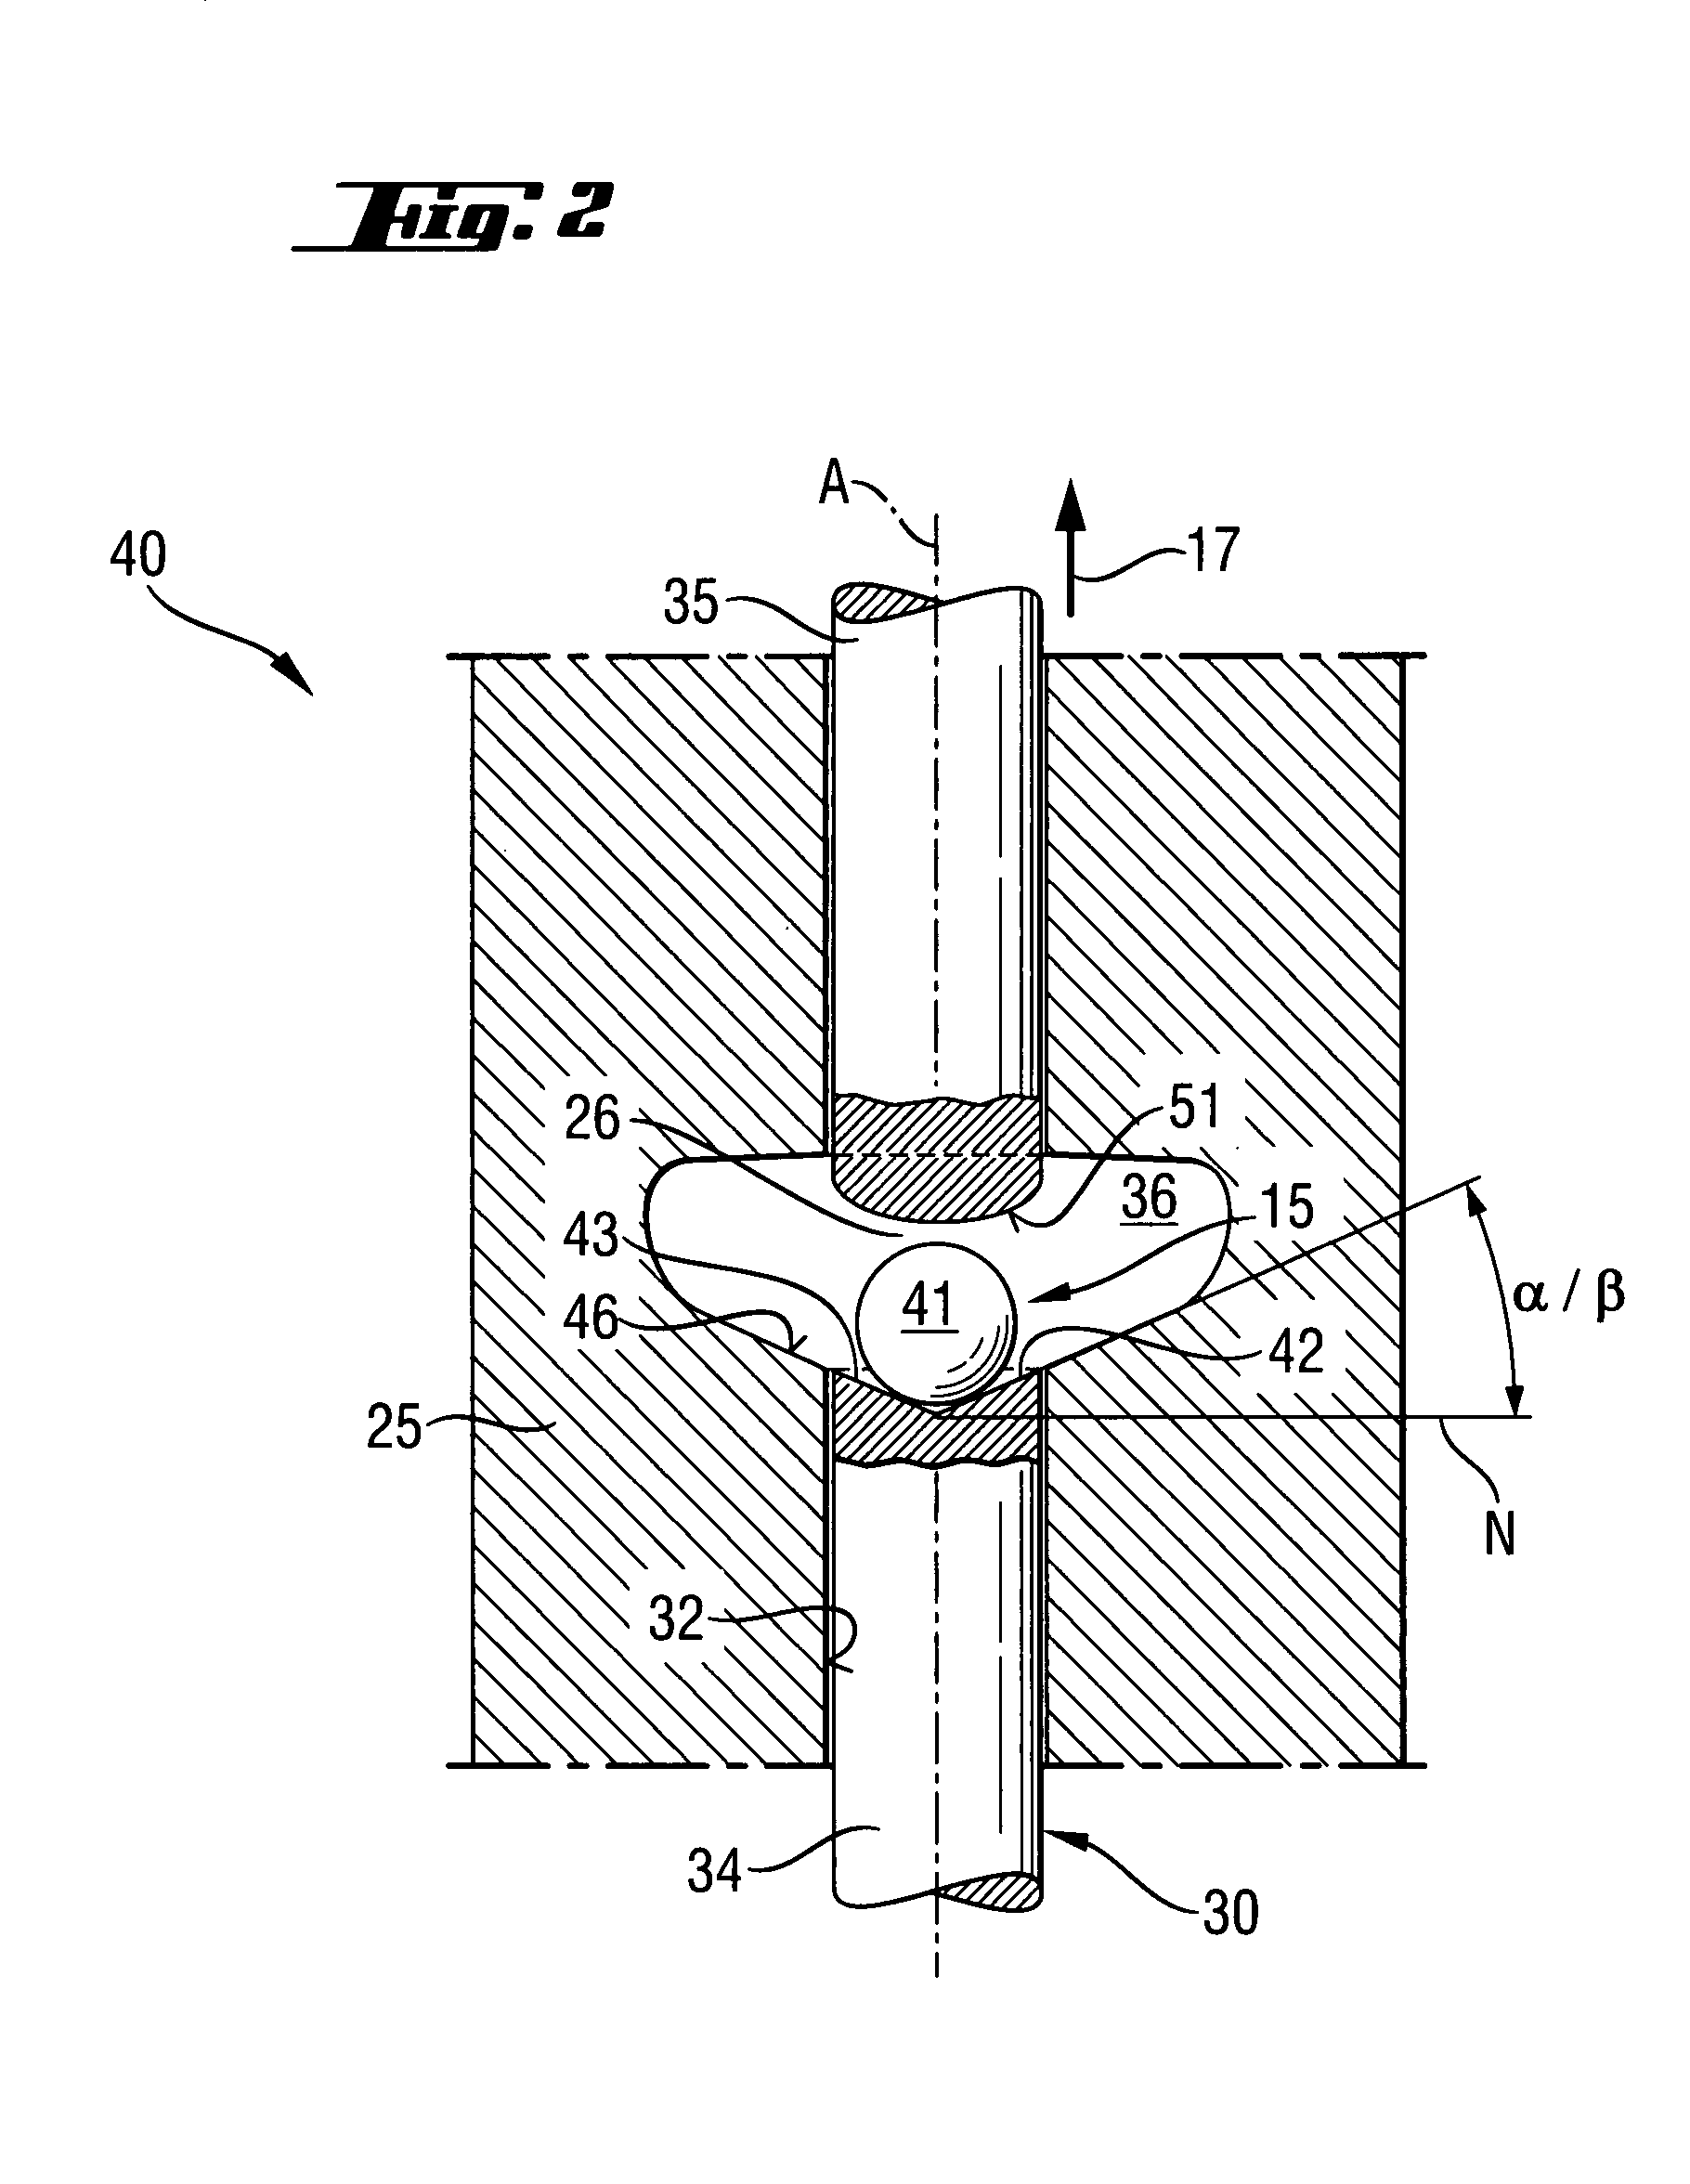 Positioning device with actuating switching means for a hand-held setting tool